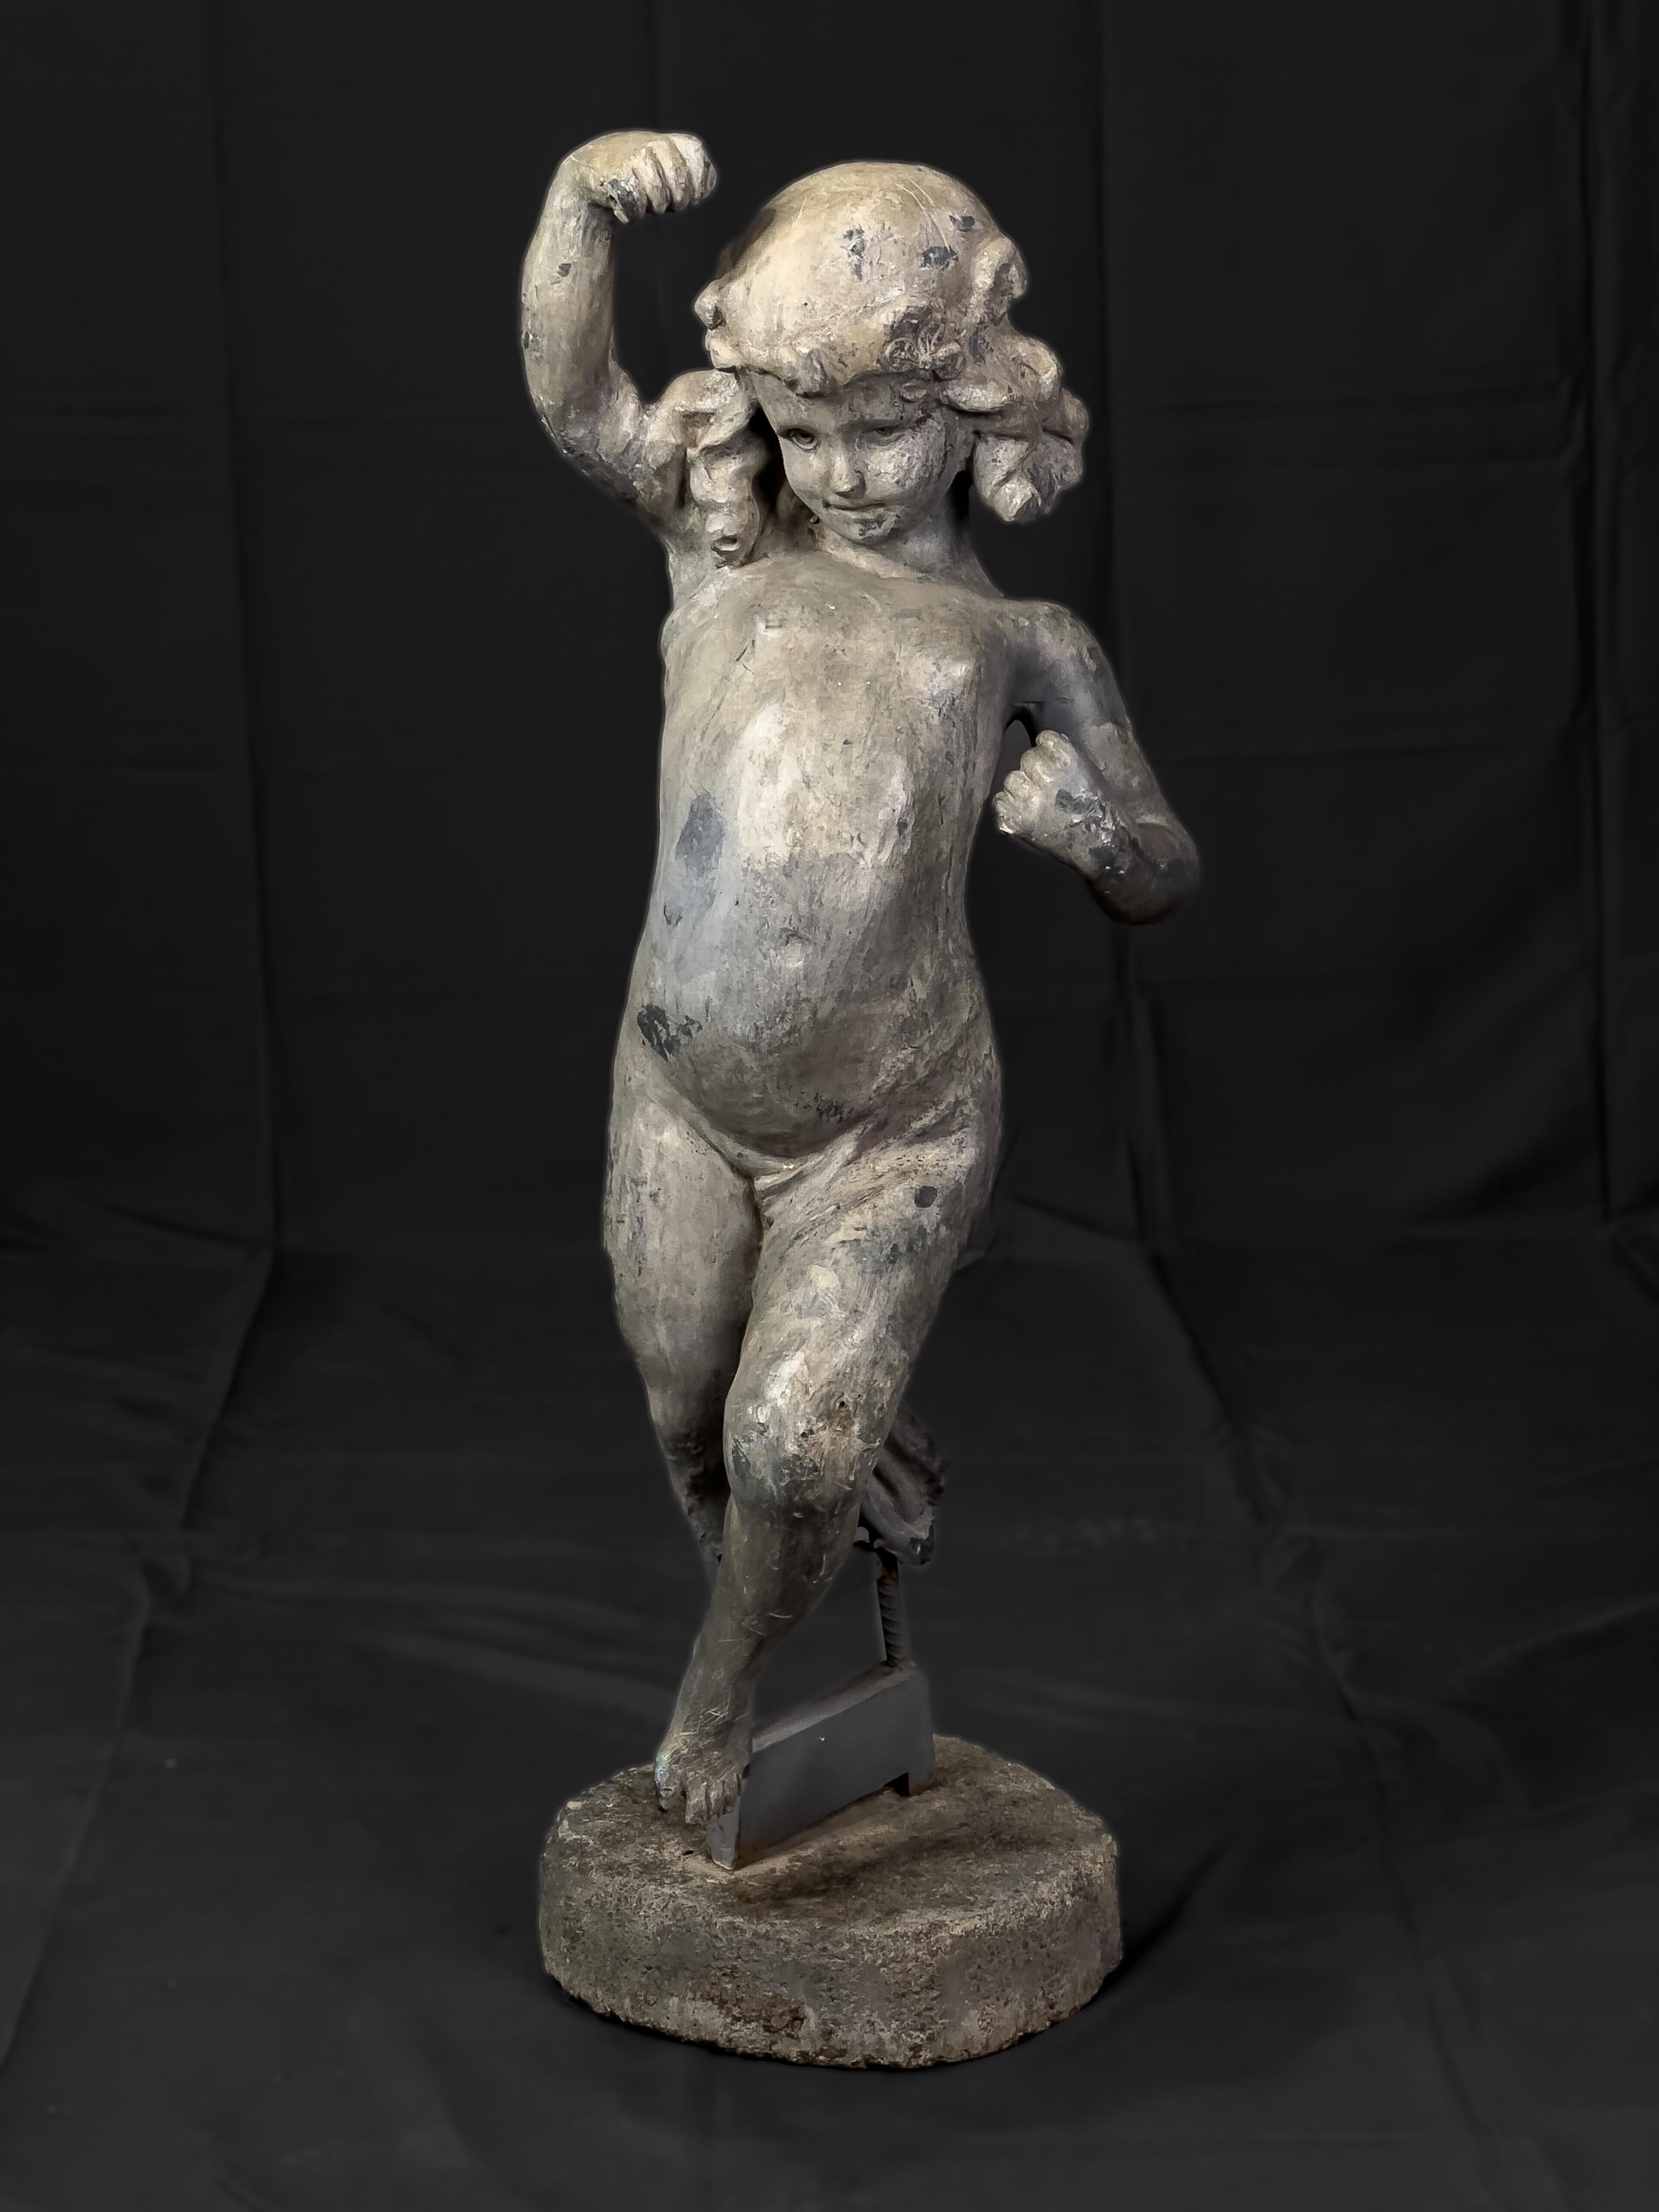 Early 20th century lead garden statue of a child frolicking outdoors. Originally might have been holding a ribbon that went from hand to hand, however the ribbon has been lost overtime. (No longer part of the statue).  

This item was part of 4